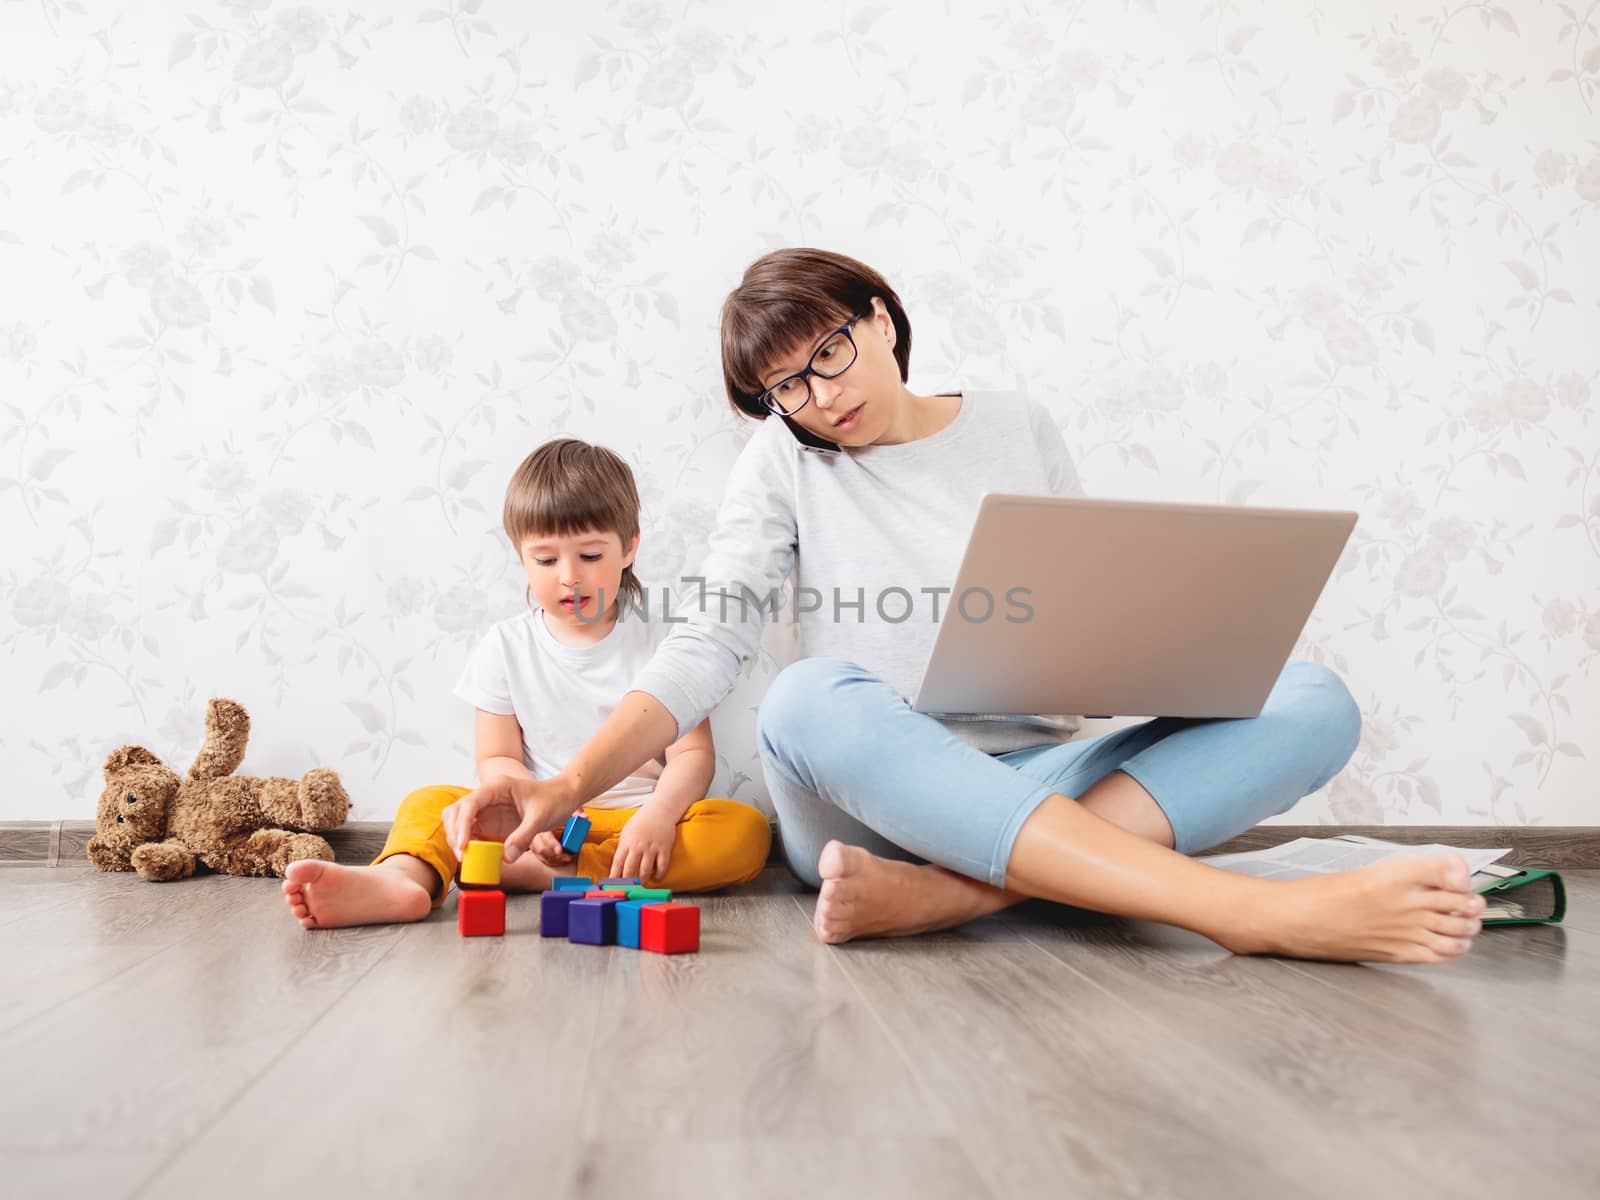 Mom and son at home quarantine because of coronavirus COVID19. Mother works remotely with laptop, son plays with toy blocks. Self isolation at home.